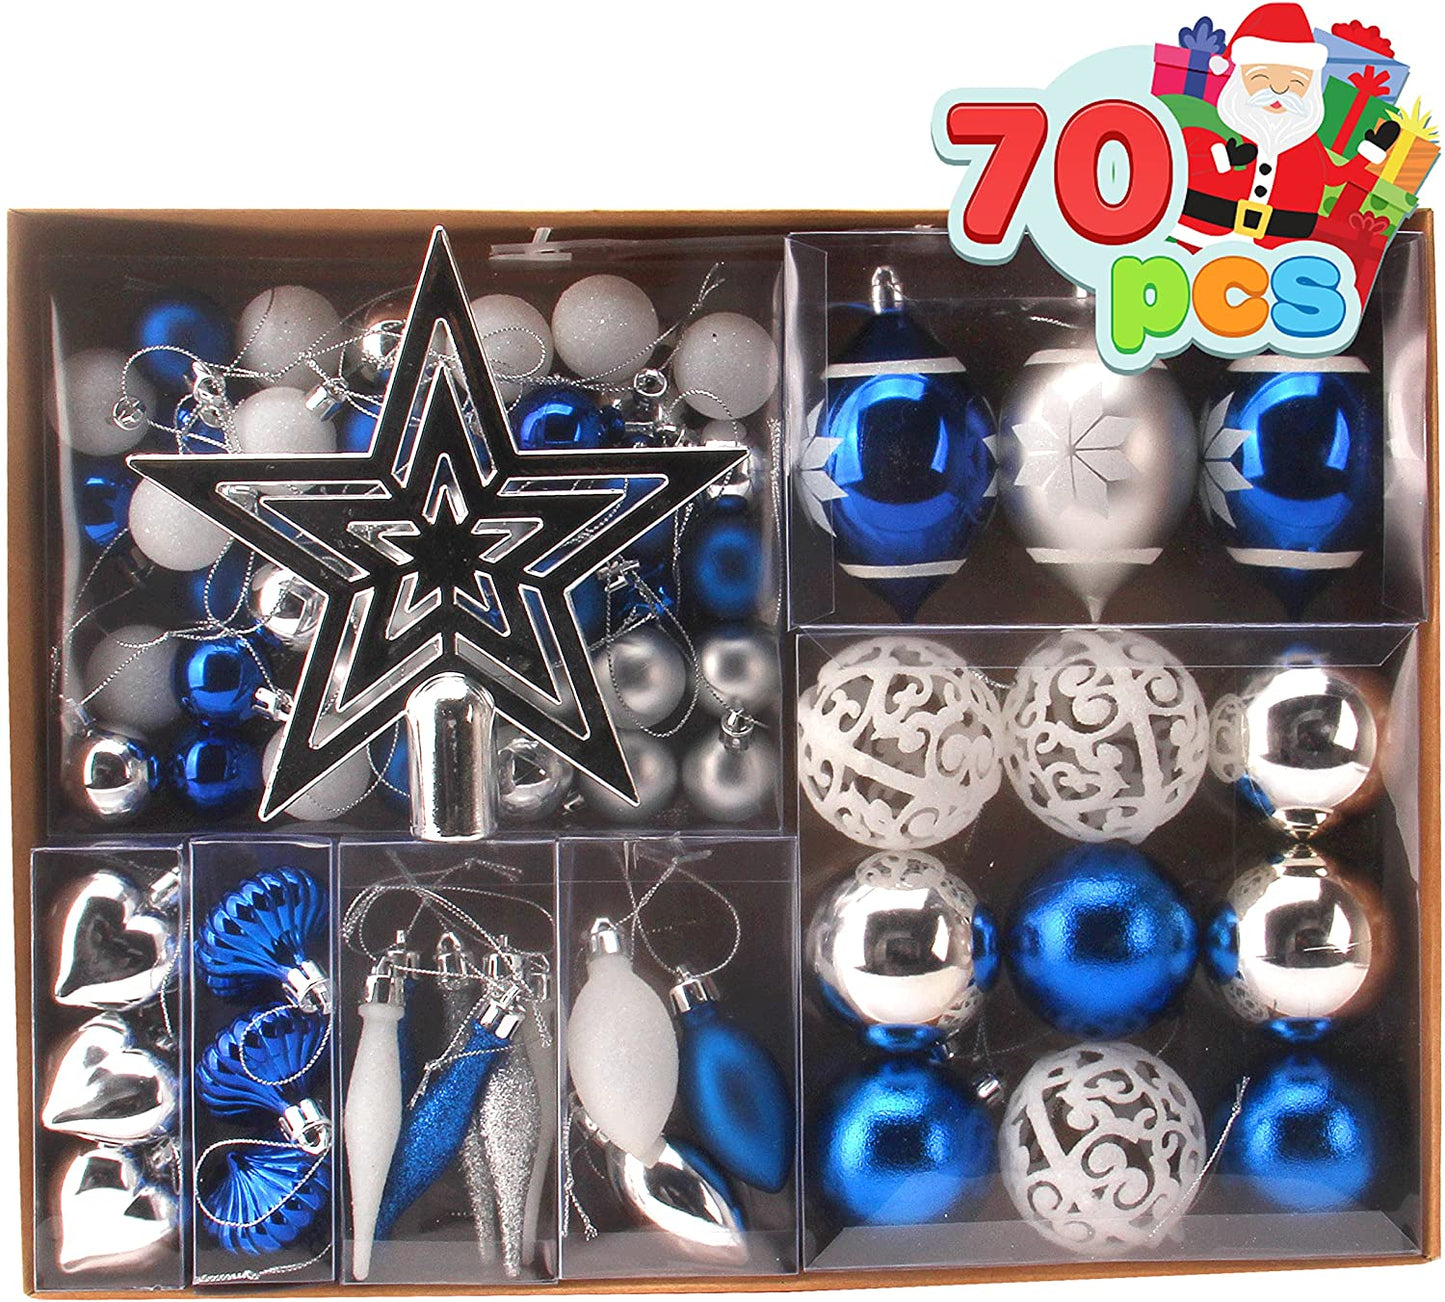 70 Pcs Blue, Silver&White Christmas Ornaments with Heart